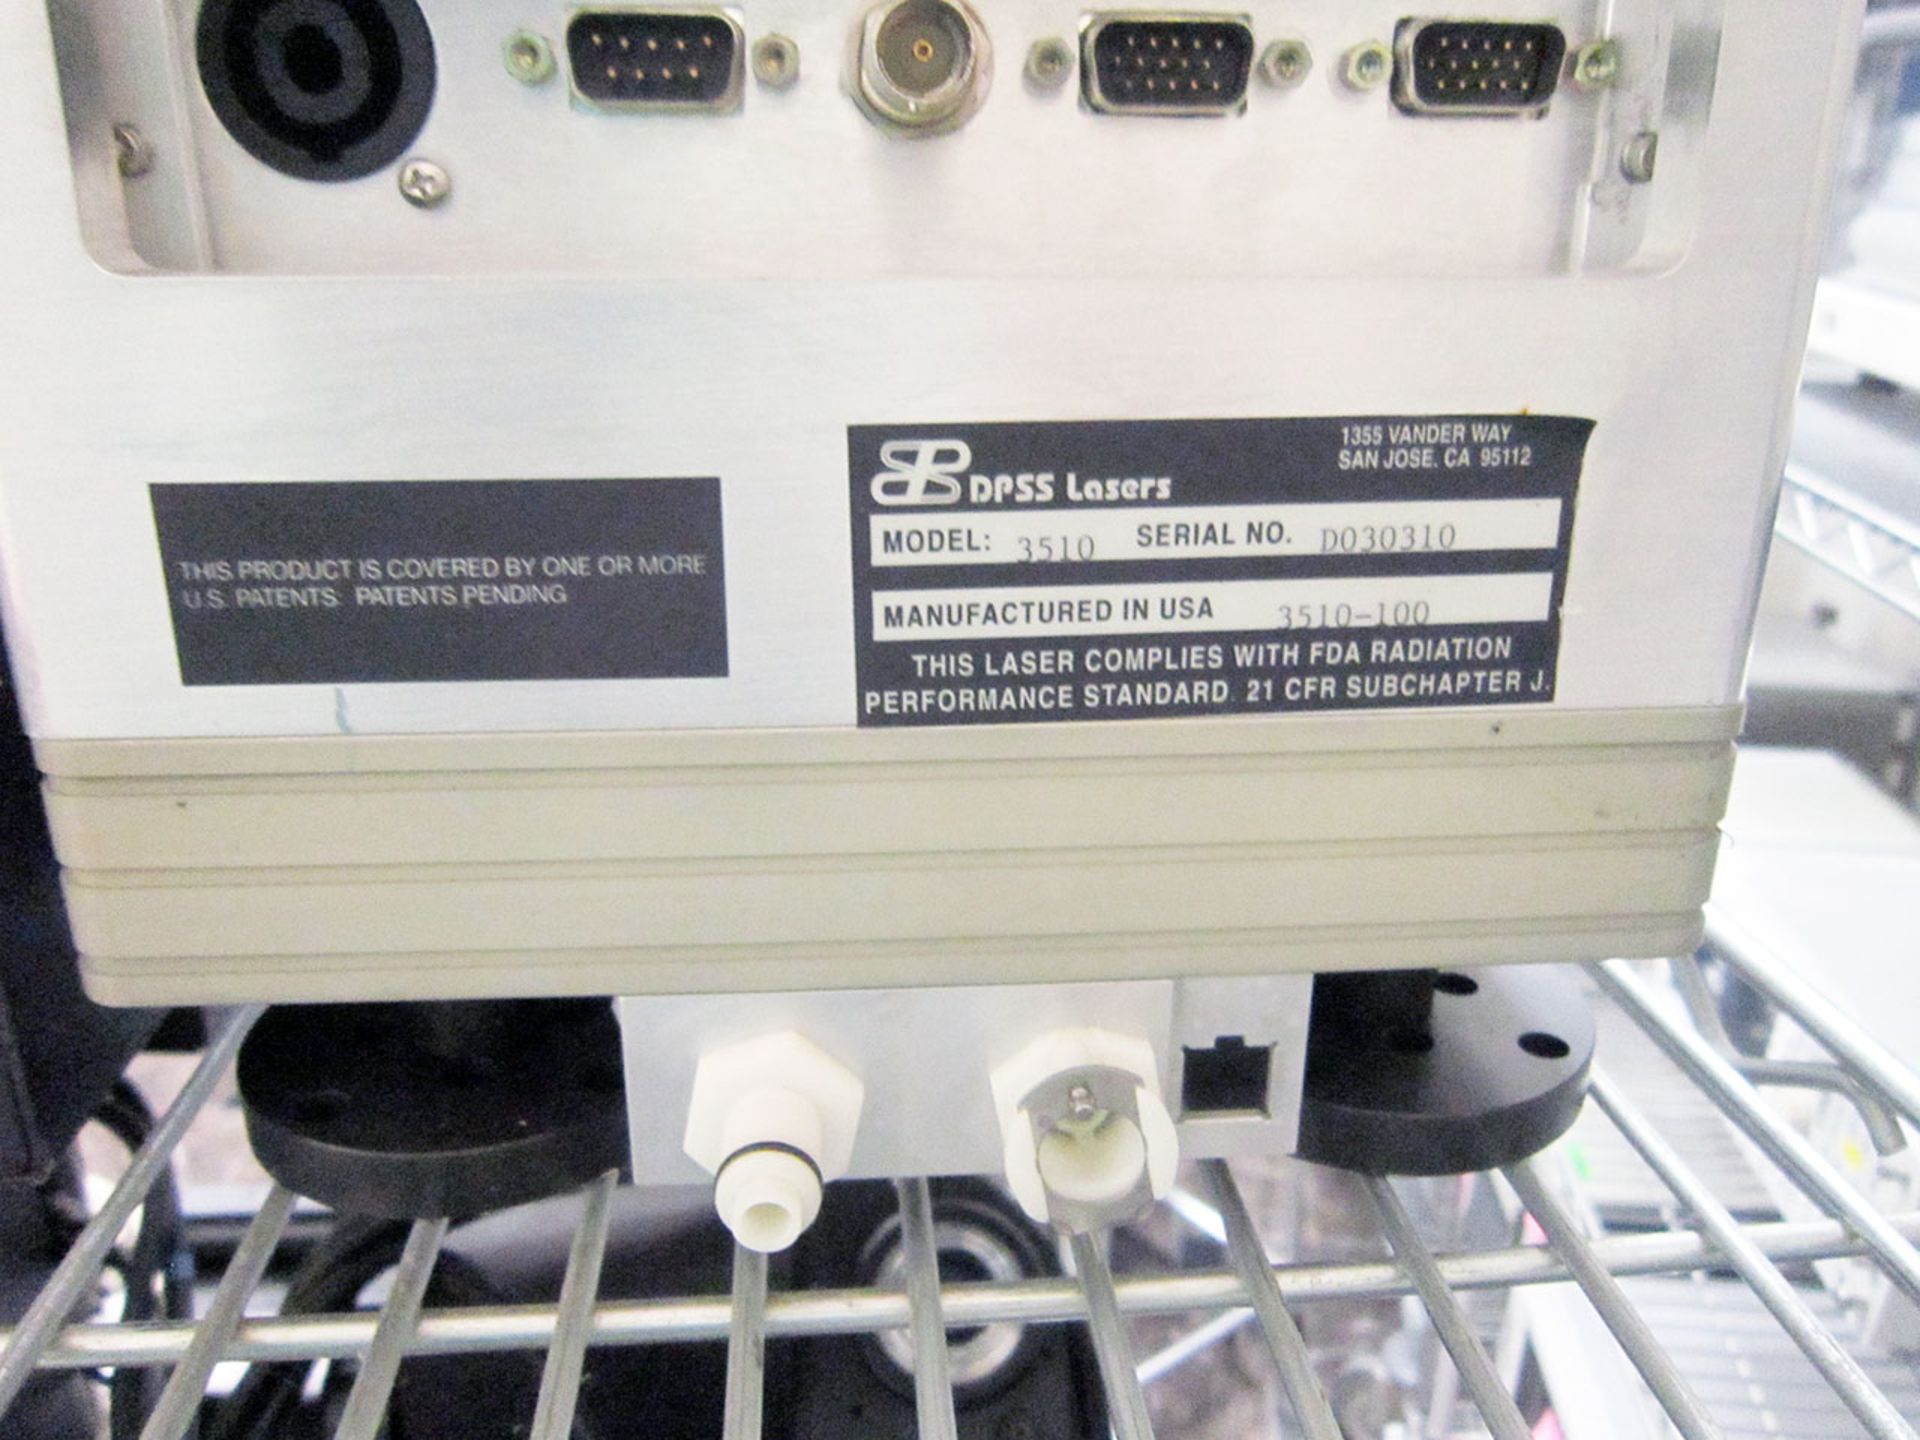 DPSS Lasers 3510-100 UV Laser System with Thermotek T255p Chiller and All Cables - Image 7 of 8